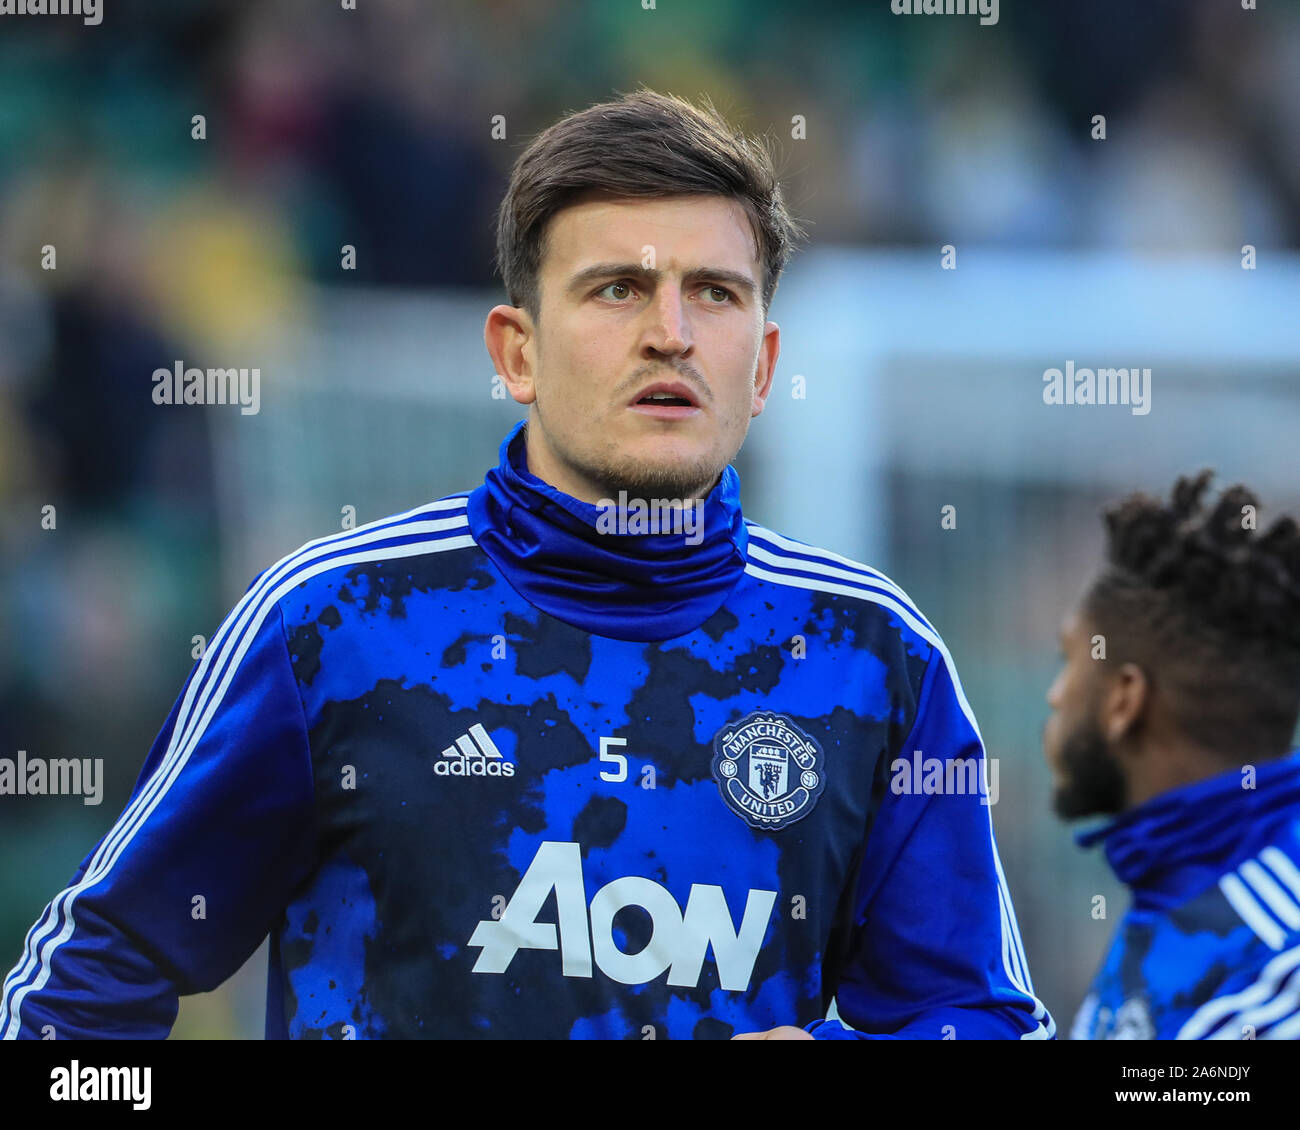 27th October 2019, Carrow Road, Norwich, England; Premier League, Norwich City v Manchester United : Harry Maguire (5) of Manchester United gaming up  Credit: Mark Cosgrove/News Images Stock Photo